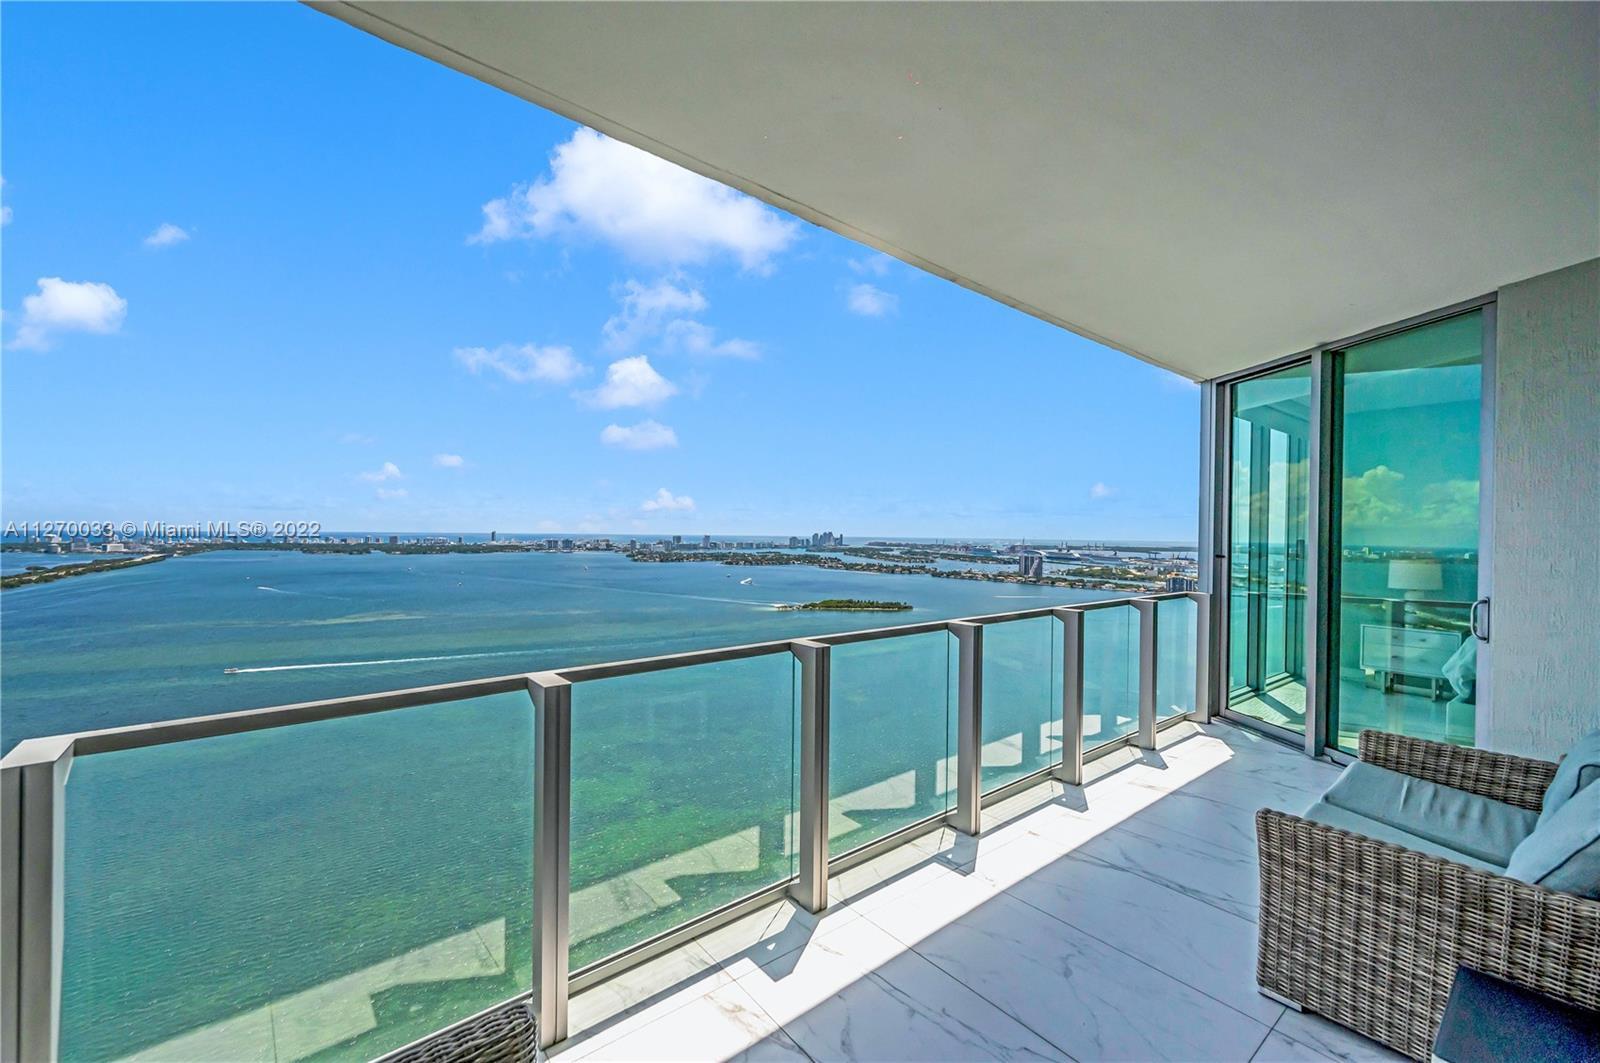 Amazing 2-bedroom 2.5-bathroom turn-key condo available for sale at Biscayne Beach. This high floor 